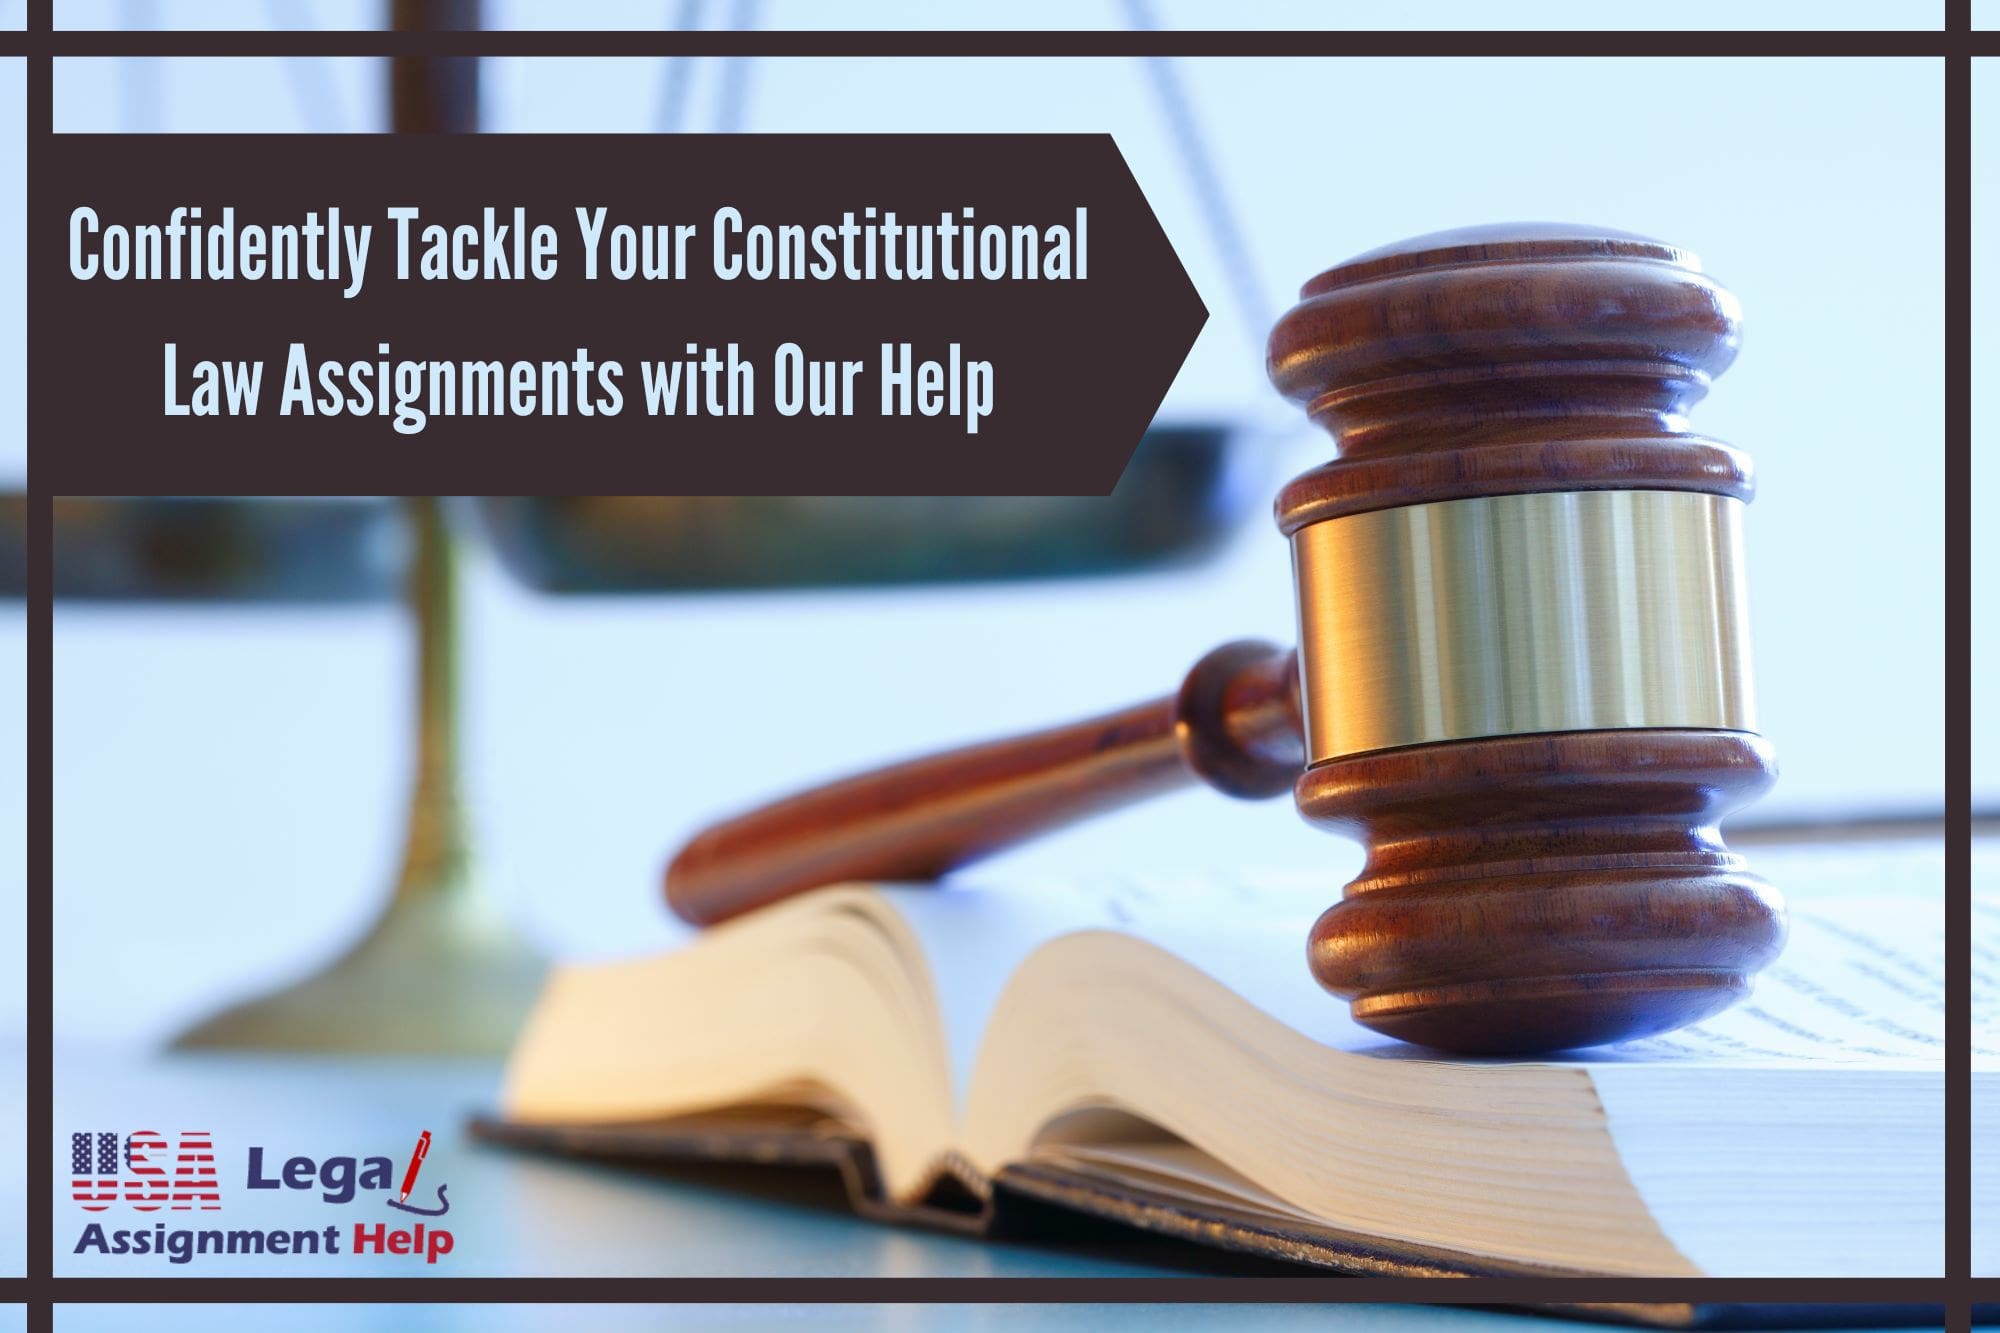 Confidently Tackle Your Constitutional Law Assignments with Our Help